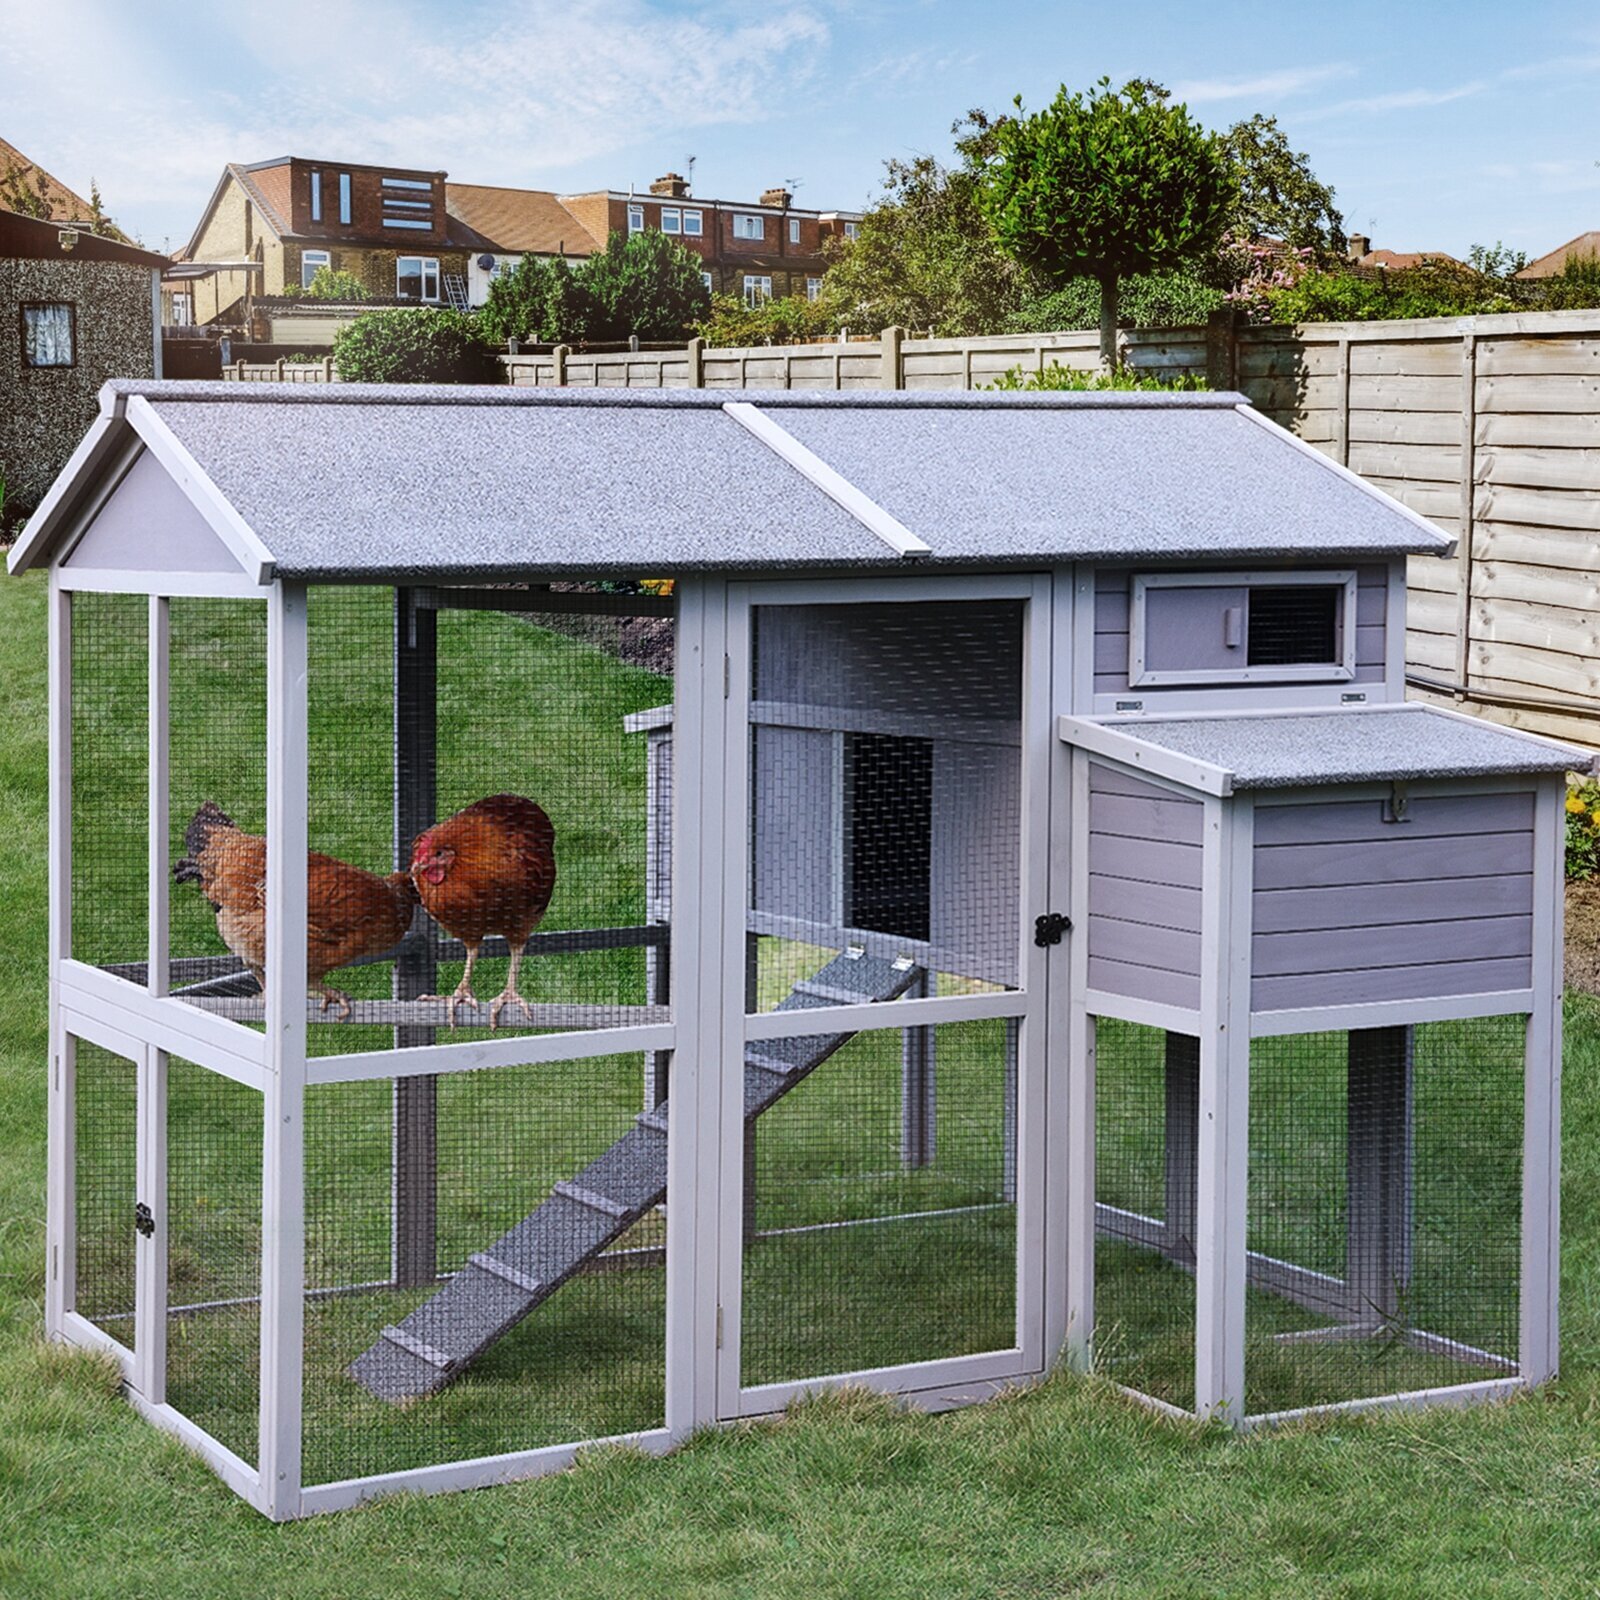 Chicken Coop with Chicken Run for up to 10 Chickens